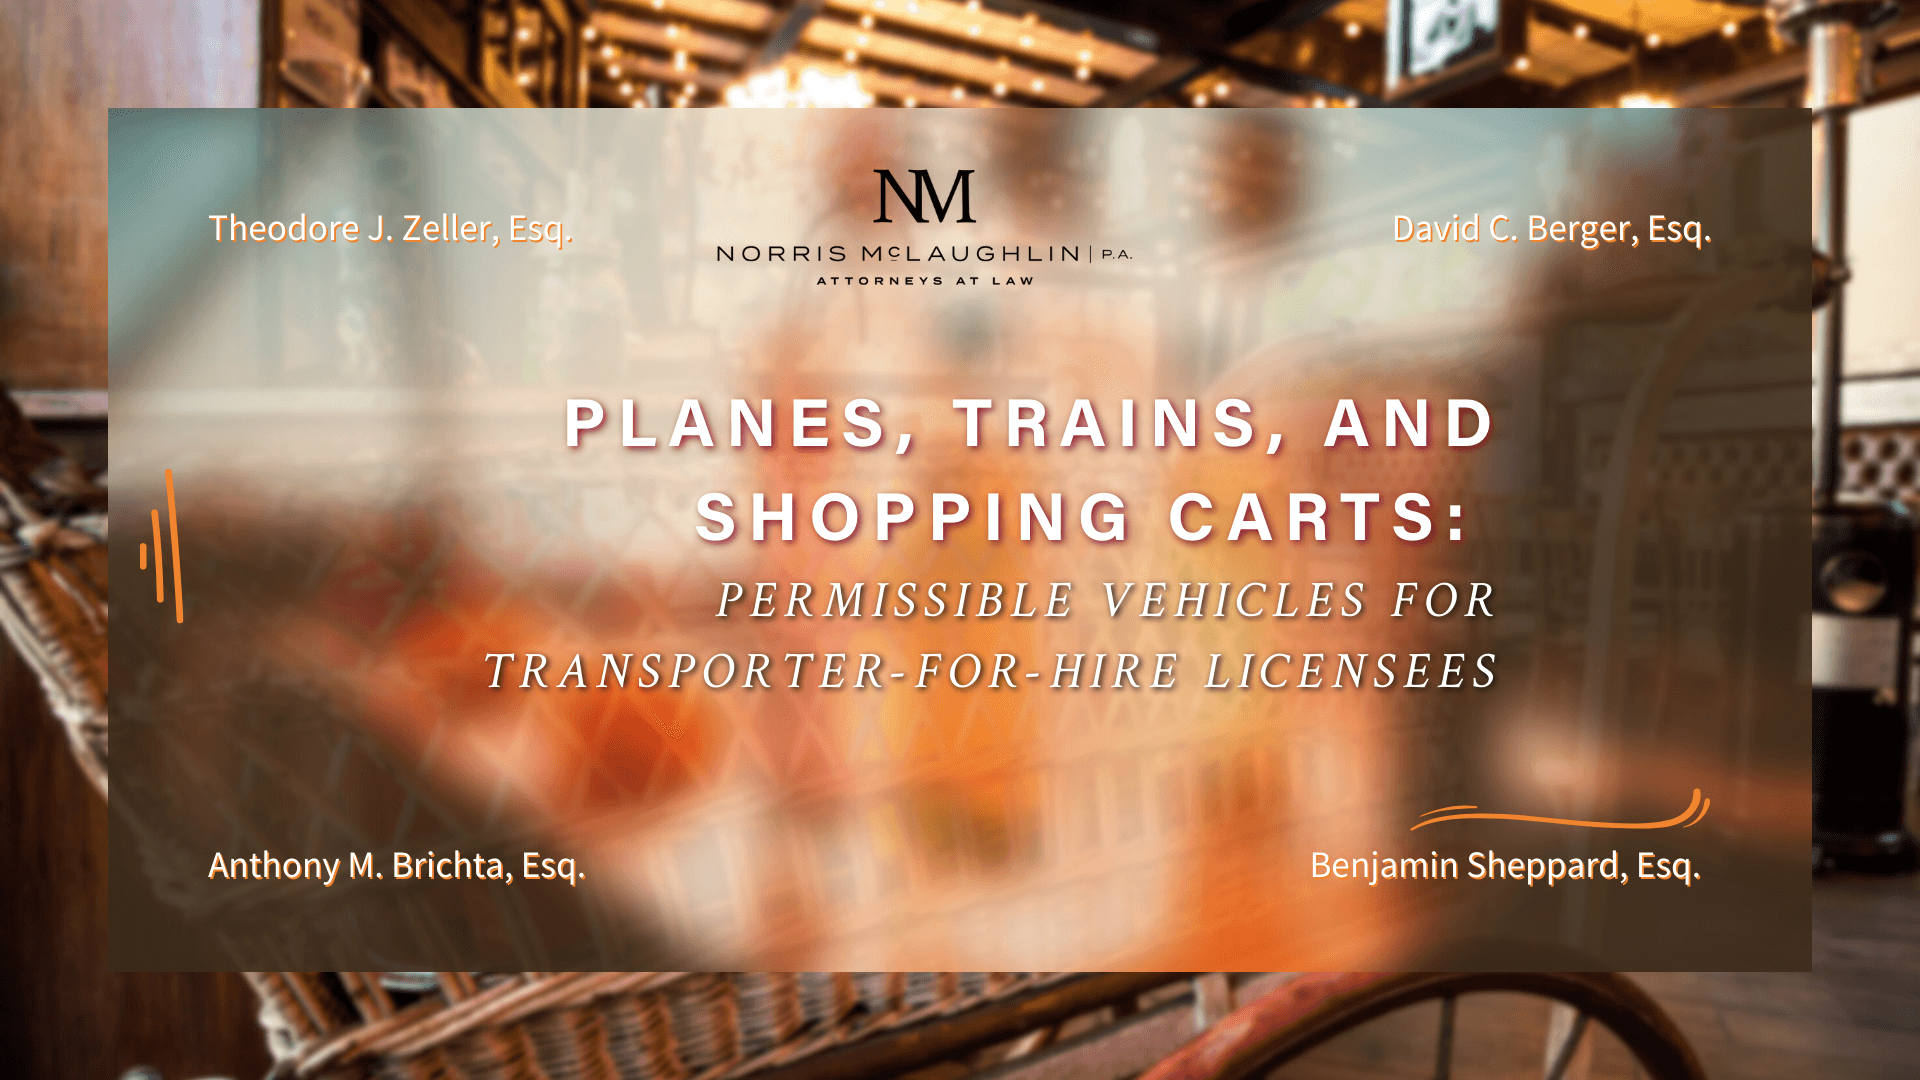 Planes, Trains, and Shopping Carts: Permissible Vehicles for Transporter-for-Hire Licensees